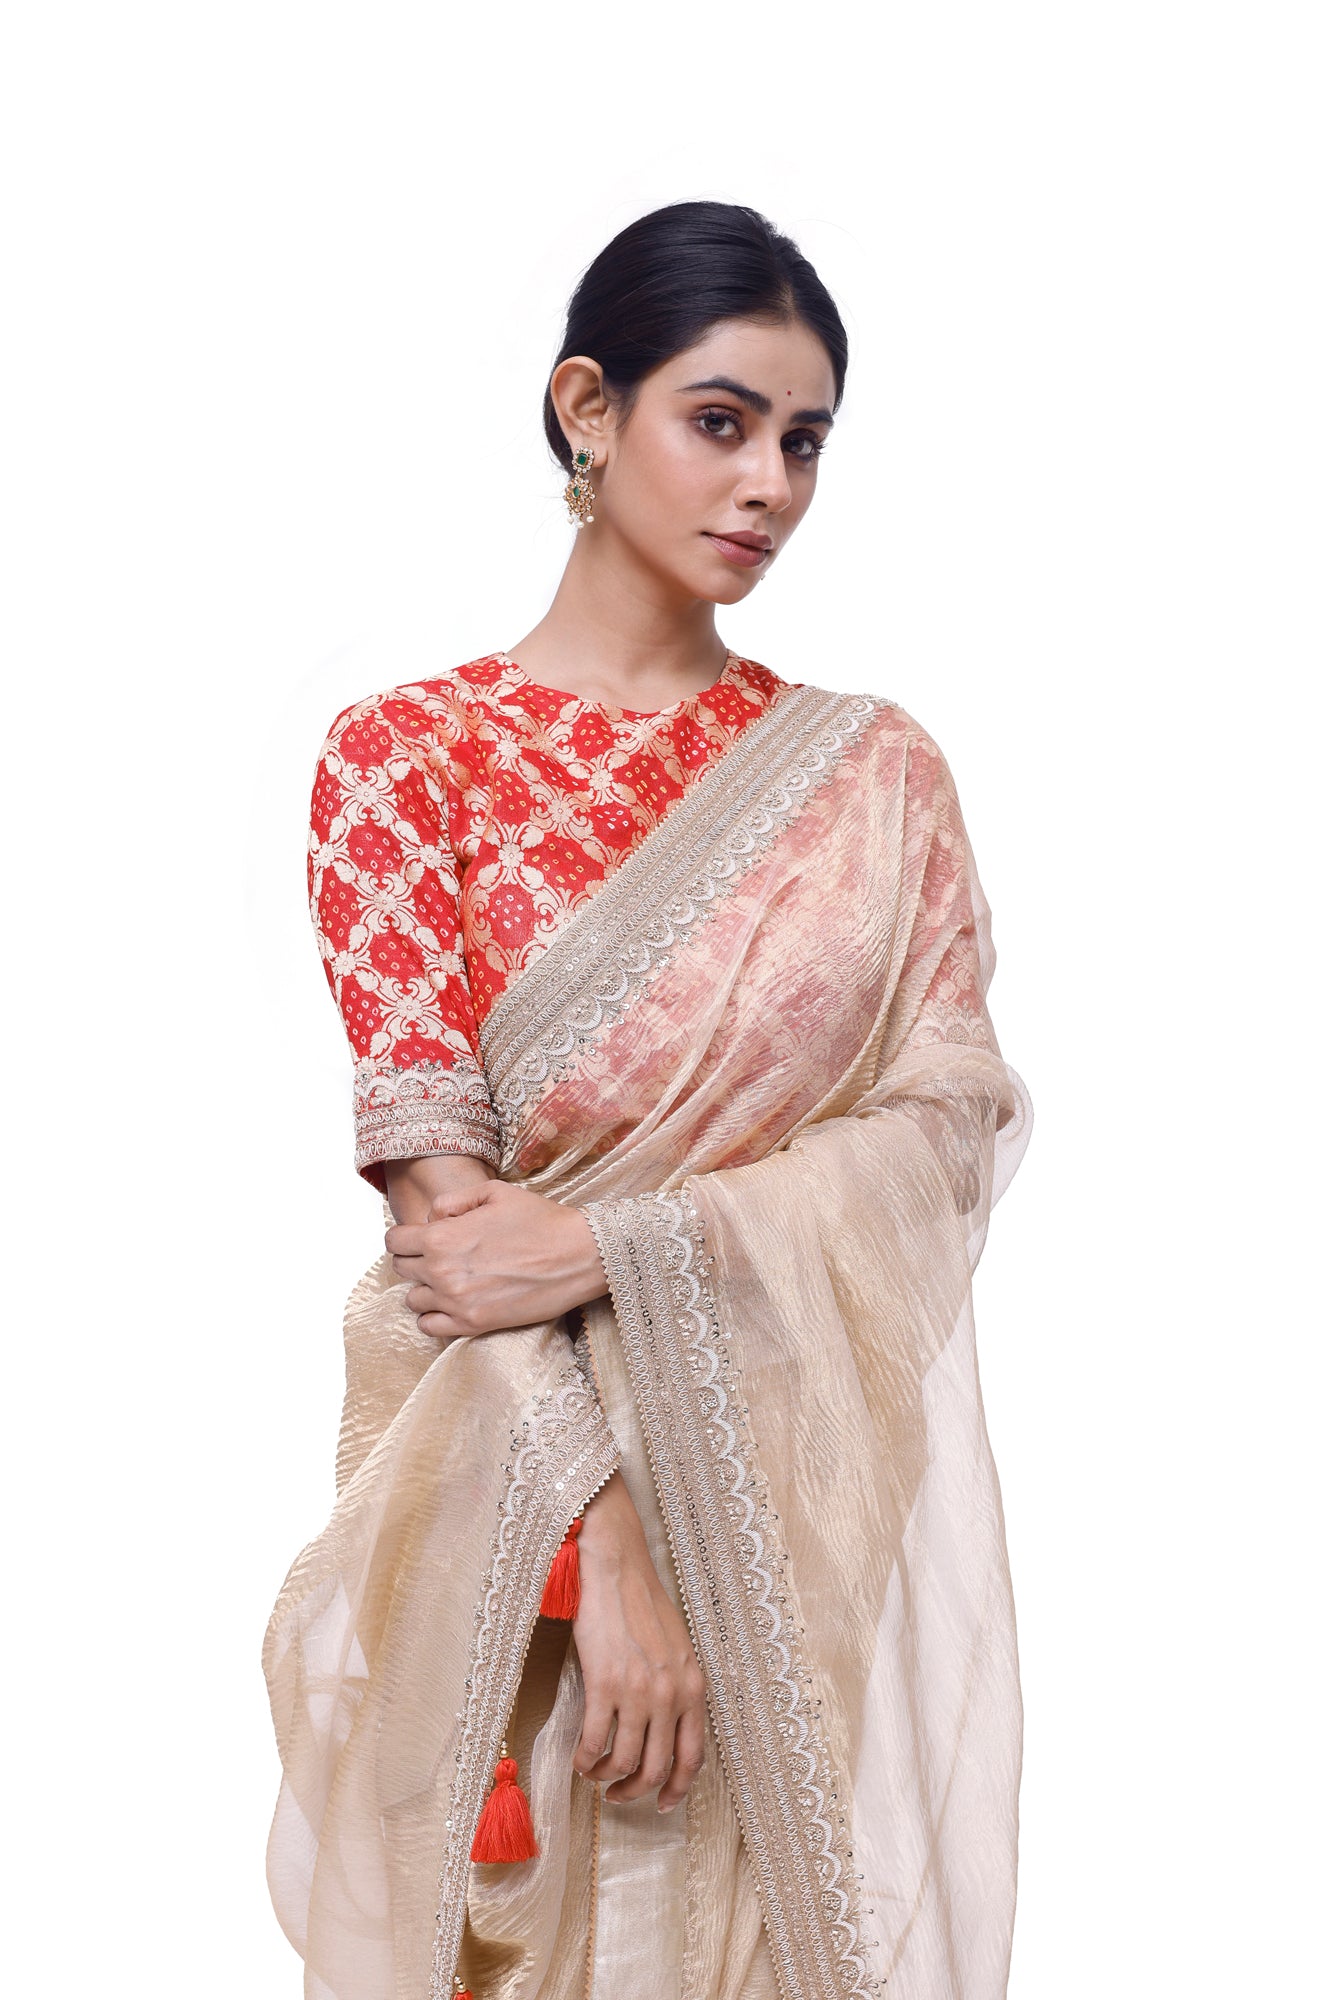 Buy gold embroidered tissue saree online in USA with red bandhej saree blouse. Look your best at parties and weddings in beautiful designer sarees, embroidered sarees, handwoven sarees, silk sarees, organza saris from Pure Elegance Indian saree store in USA.-closeup